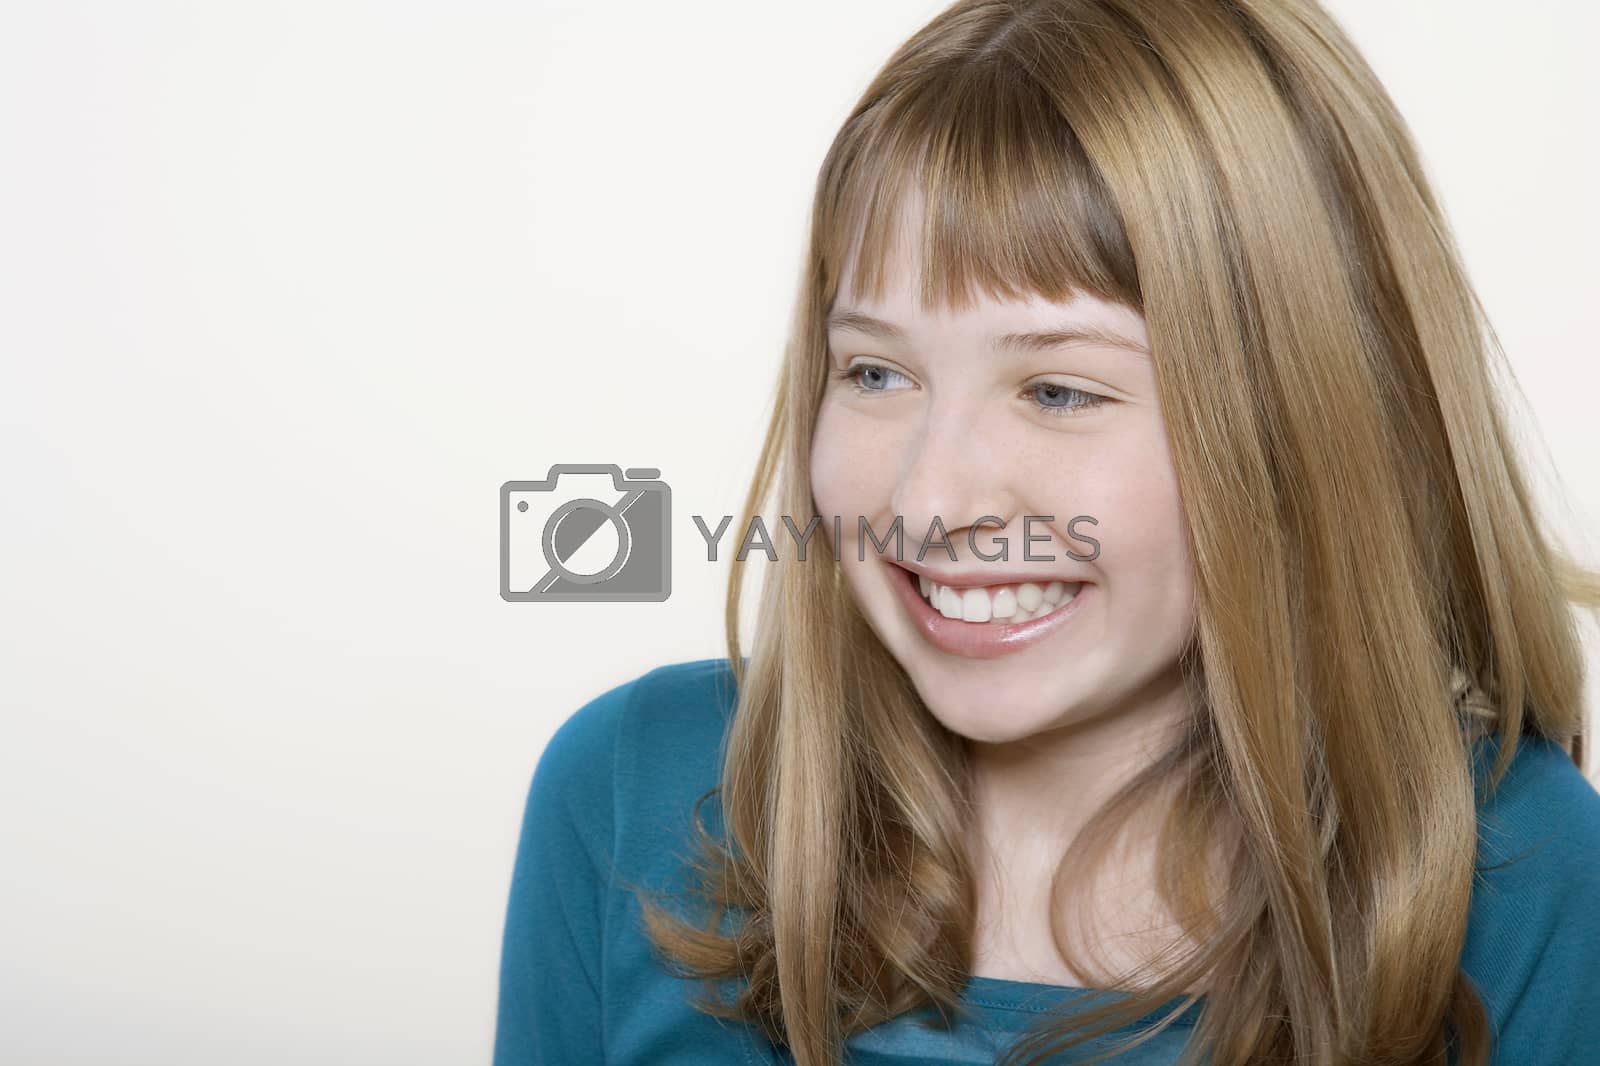 Royalty free image of Smiling teenage girl close-up by moodboard